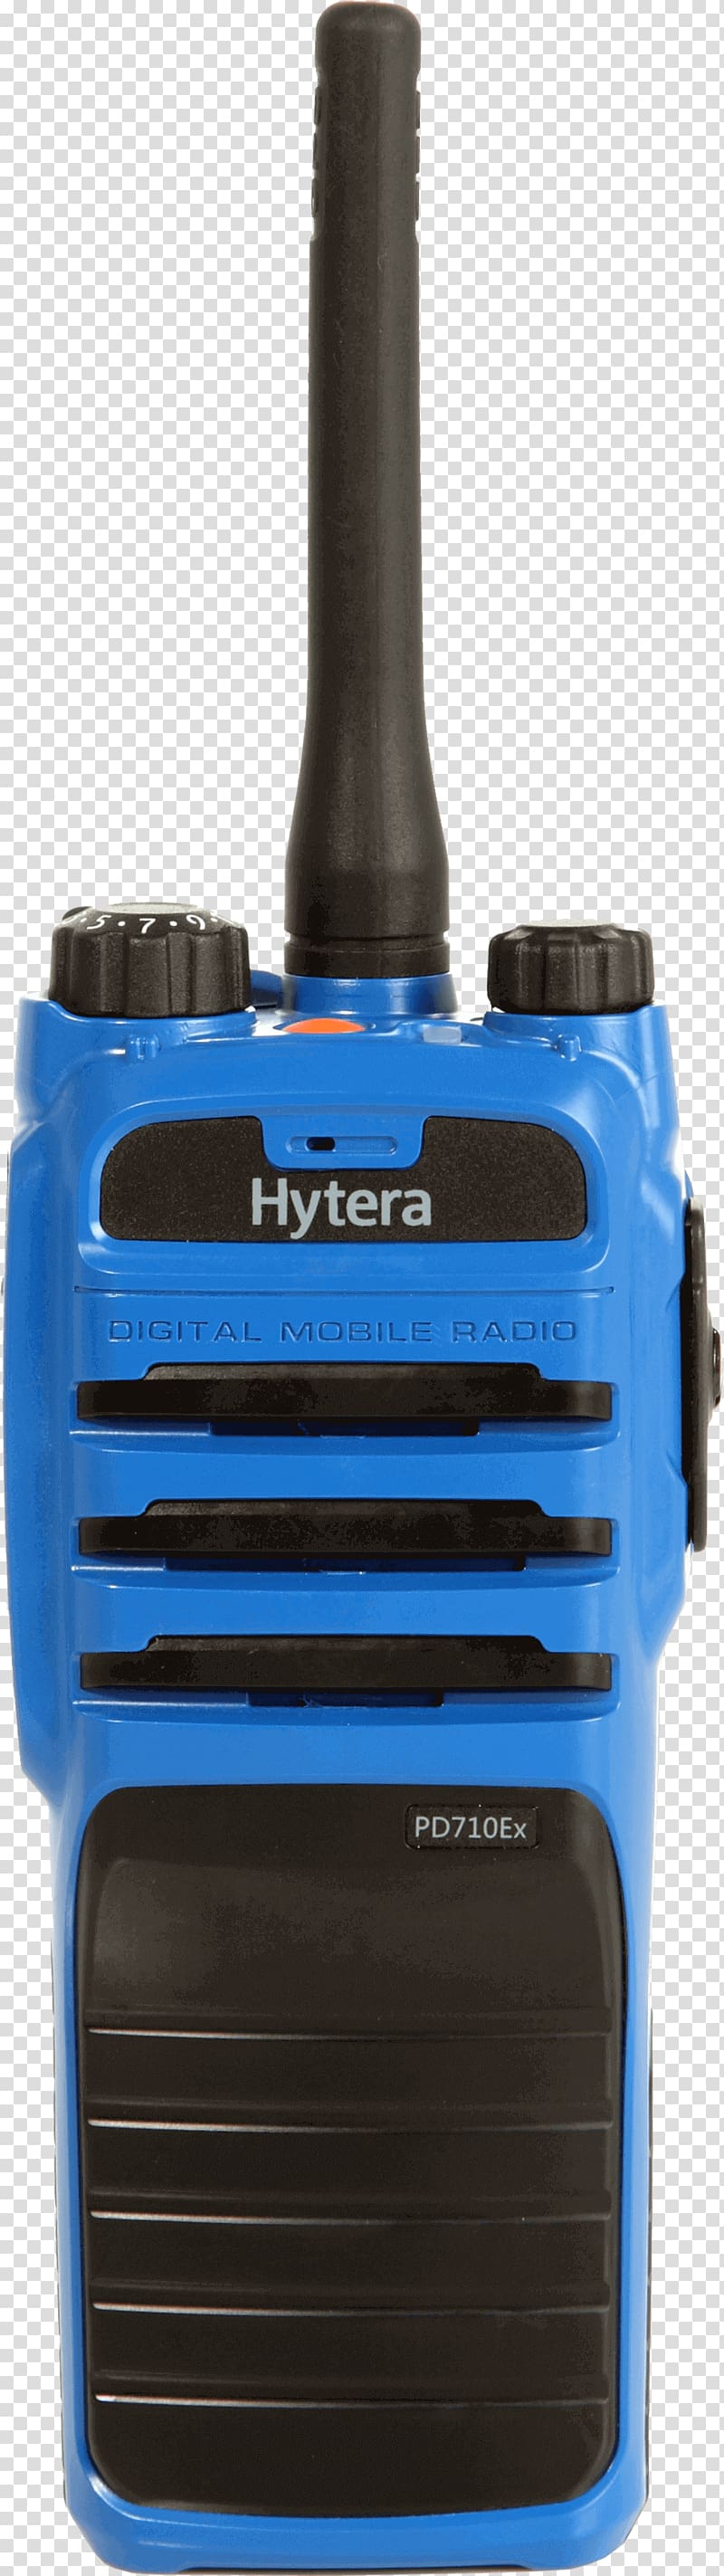 Walkie-talkie ATEX directive Hytera Two-way radio, radio transparent background PNG clipart